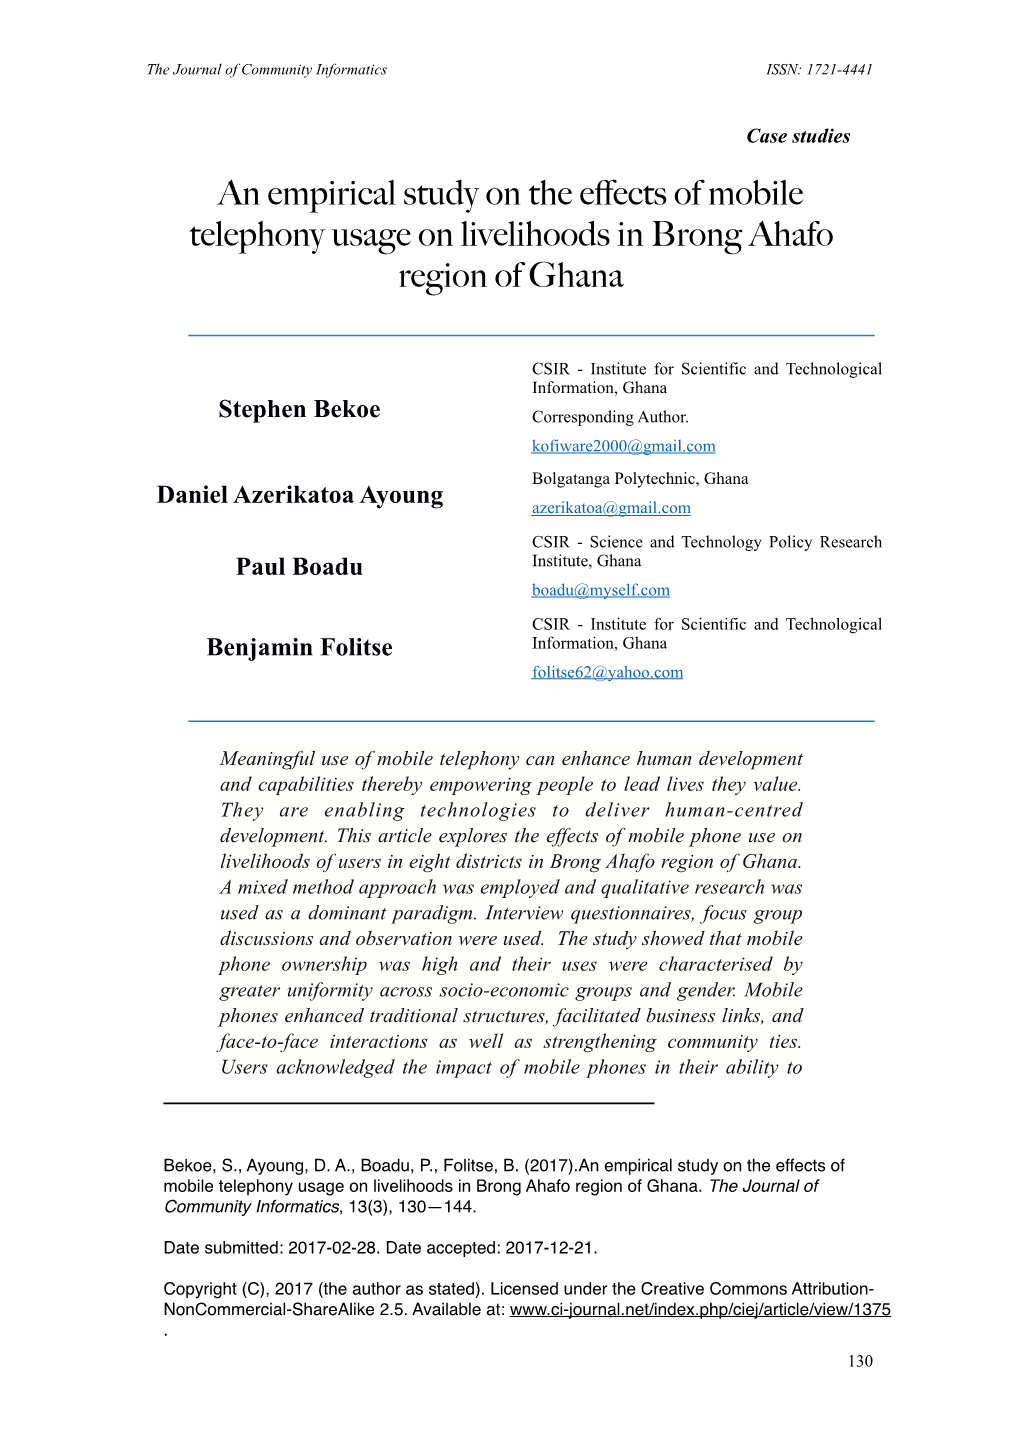 An Empirical Study on the Effects of Mobile Telephony Usage on Livelihoods in Brong Ahafo Region of Ghana